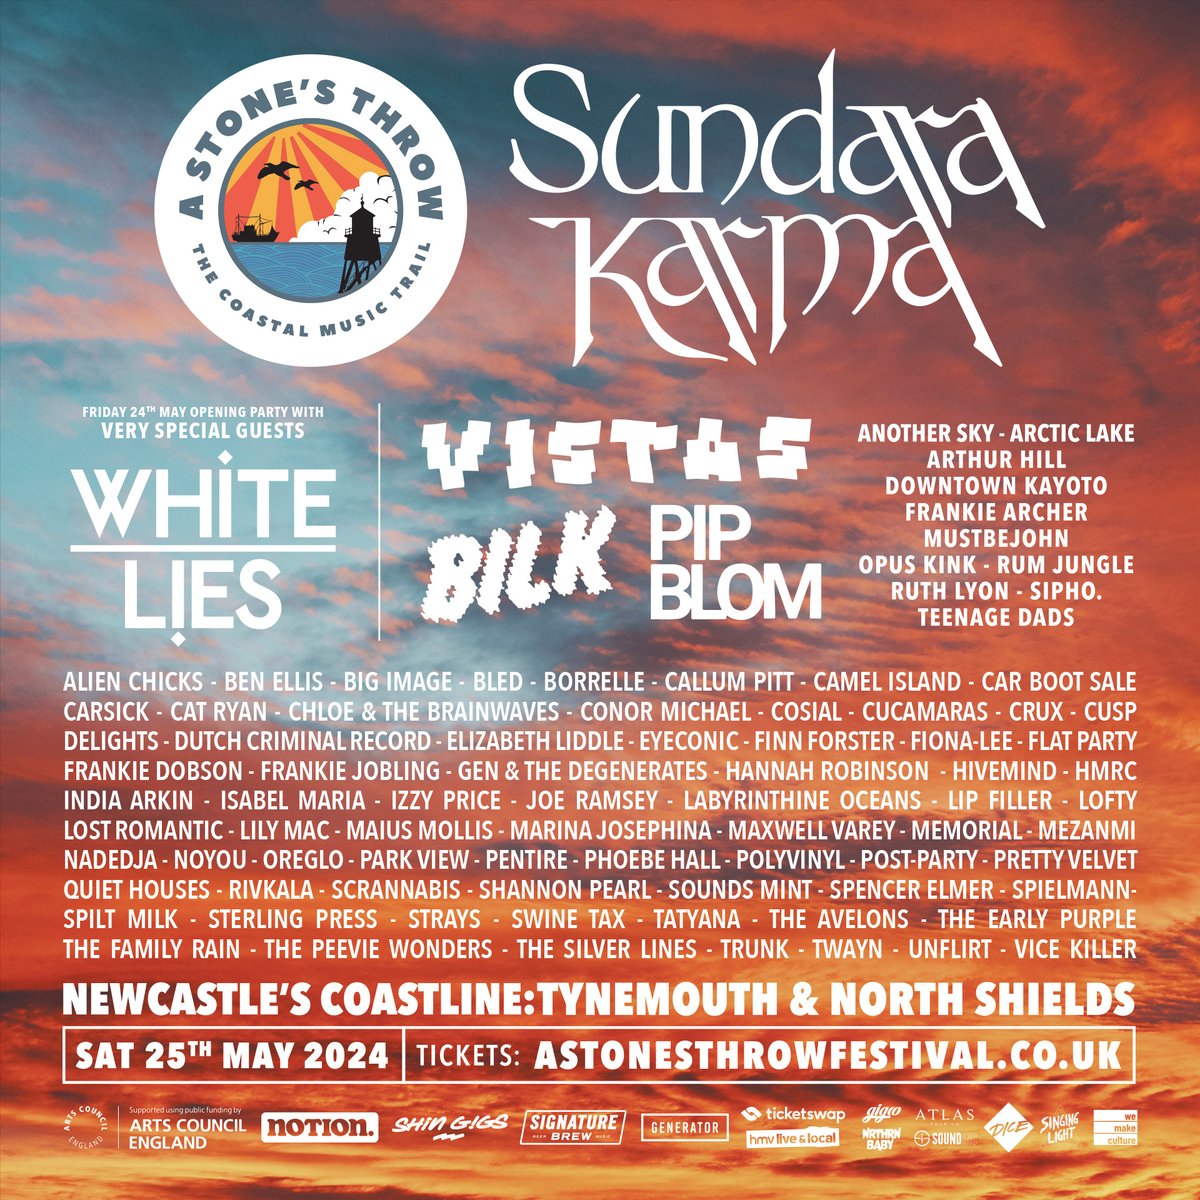 A Stone's Throw Festival 2024 - North East’s Coastal Music Trail Tynemouth & North Shields - Sat May 25 Second Wave Of Acts Announced Include White Lies (Friday Night Opening Party), Vistas, Another Sky, Alien Chicks & Flat Party @Jowheretogo Preview: jowheretogo.co.uk/f/a-stone%E2%8…